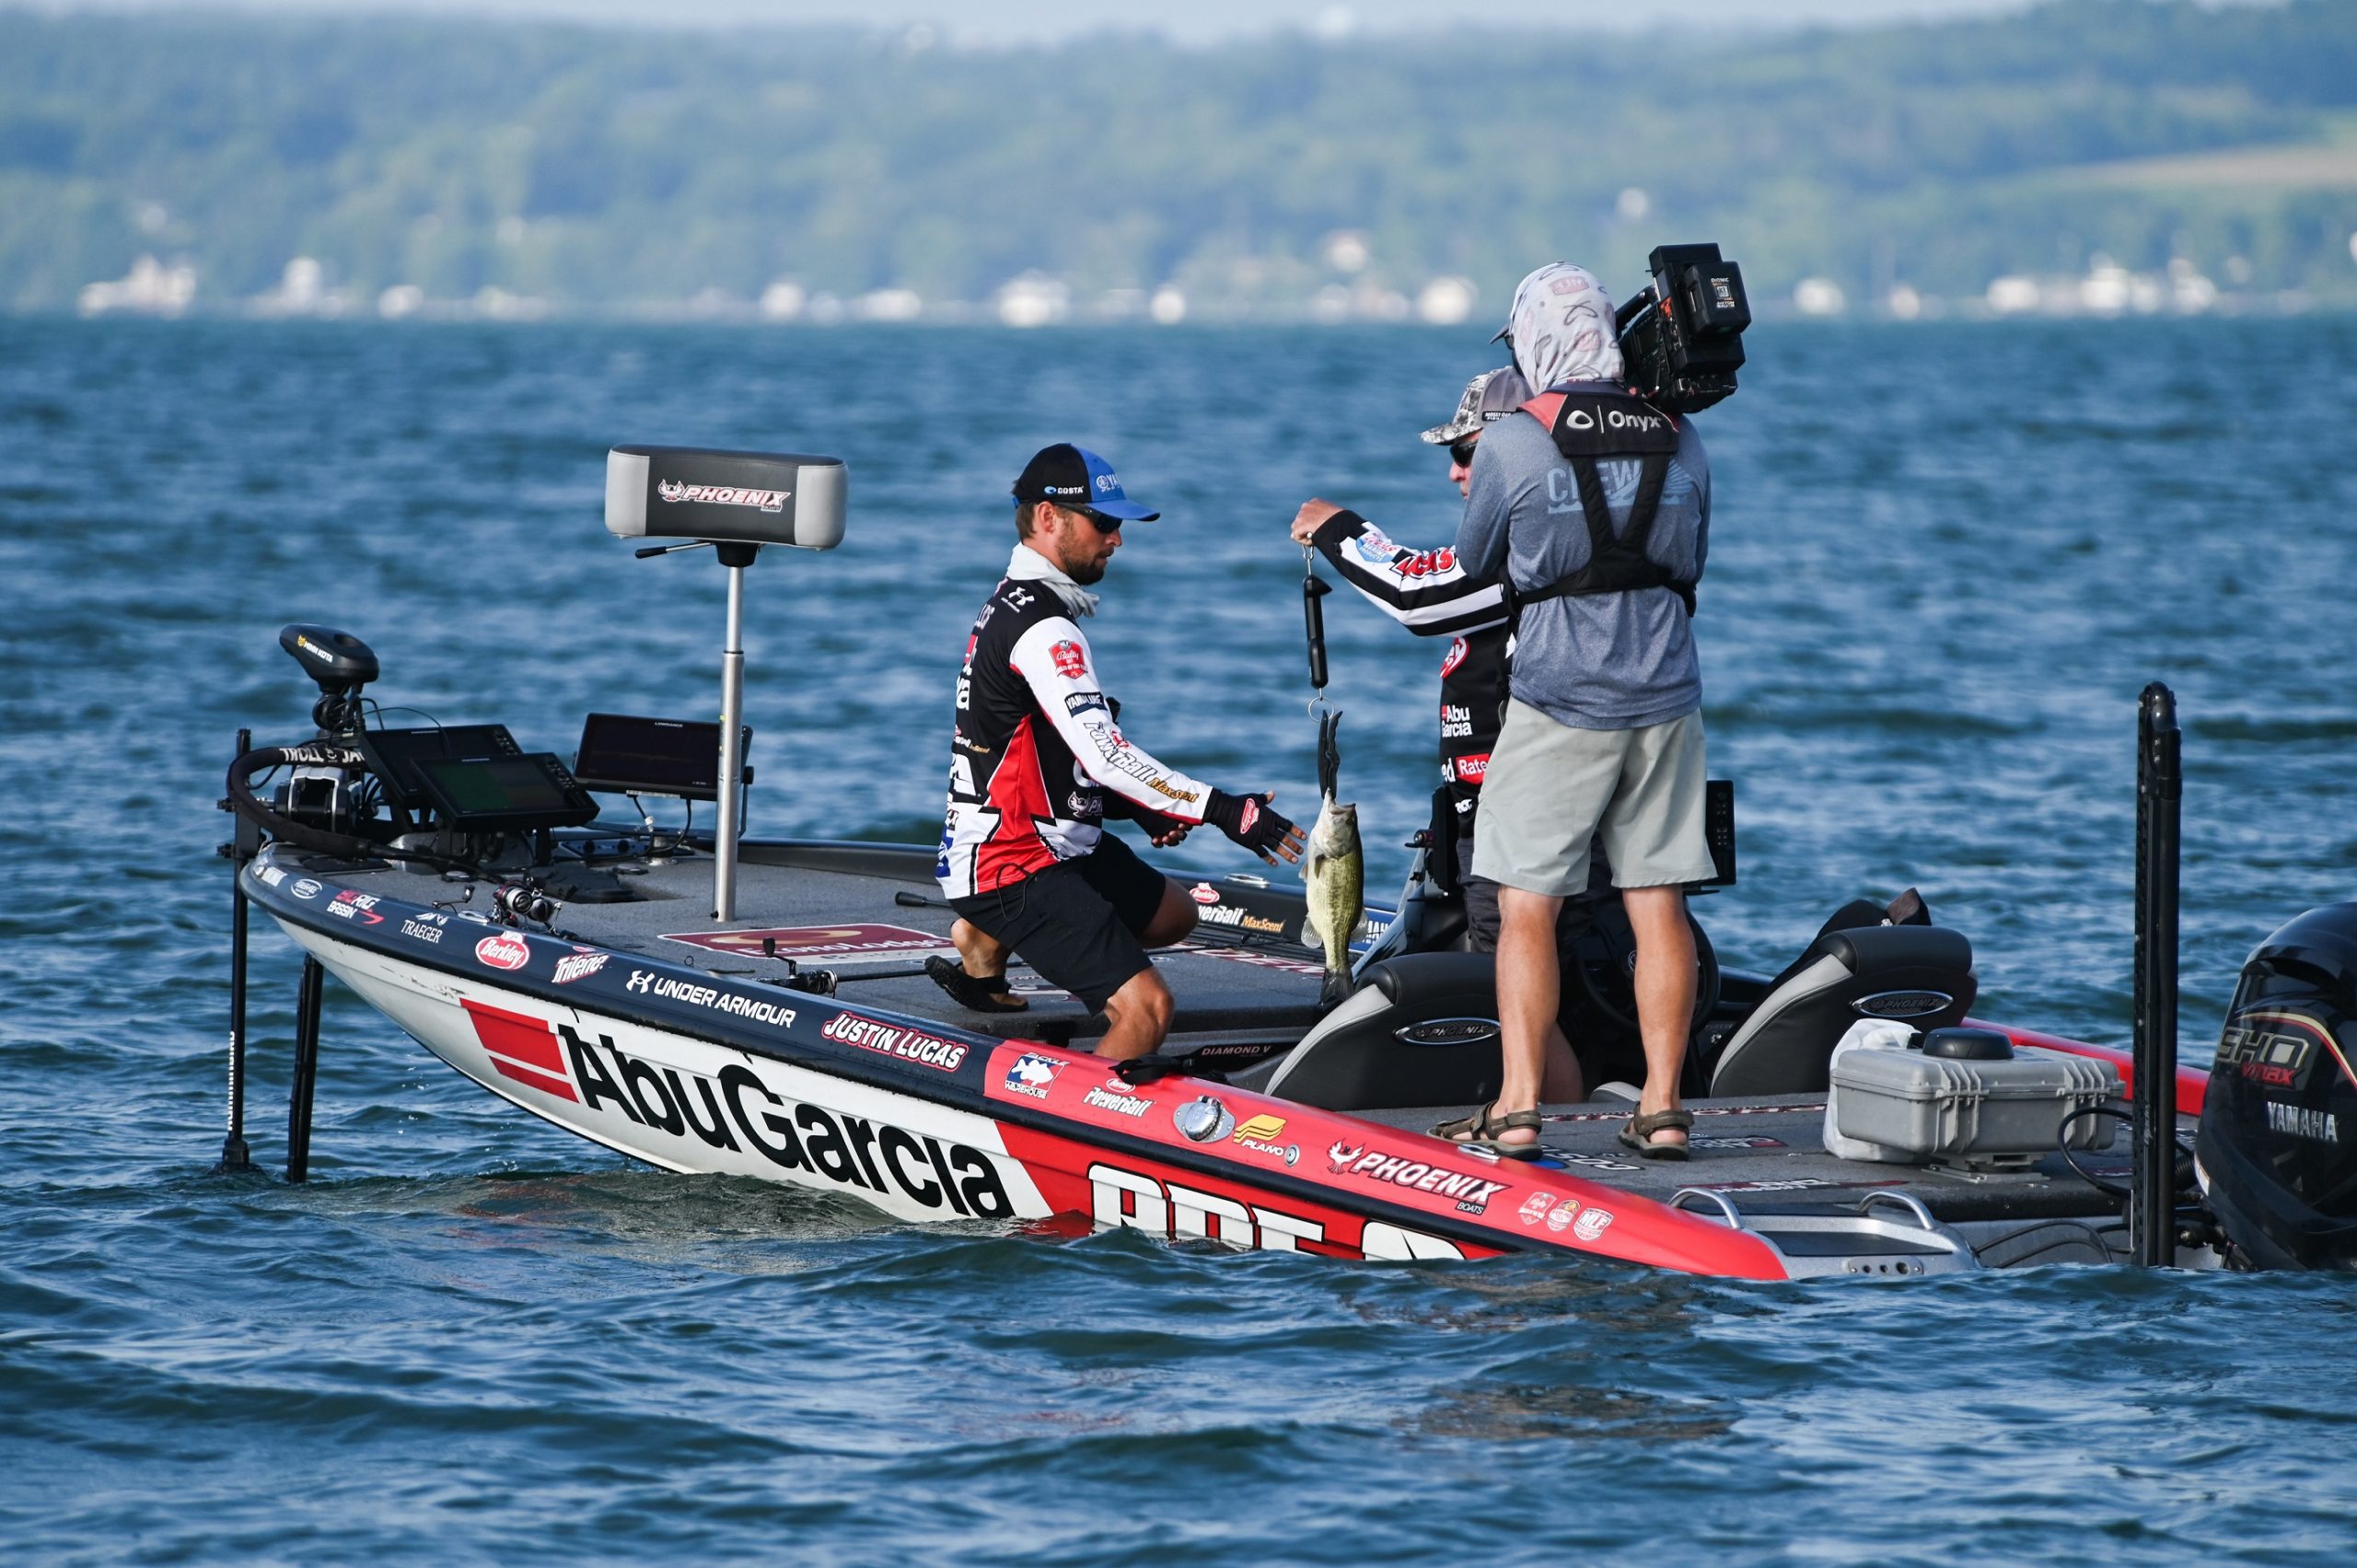 Lucas Catches 181 Pounds Over Two Days at MLF Bass Pro Tour Fox